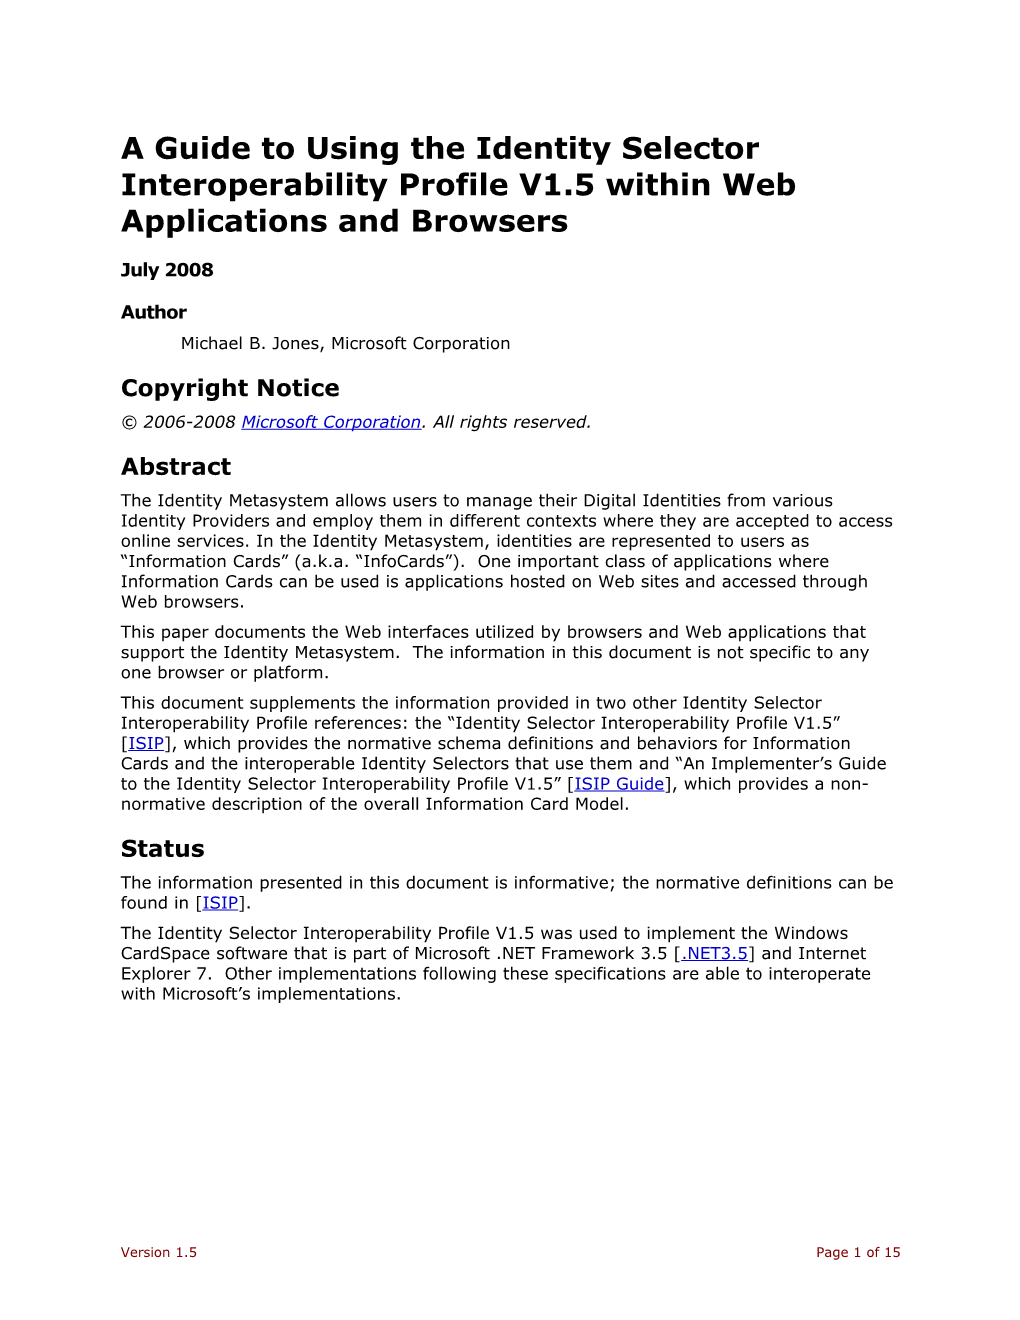 A Guide to Using the Identity Selector Interoperability Profile Within Web Applications